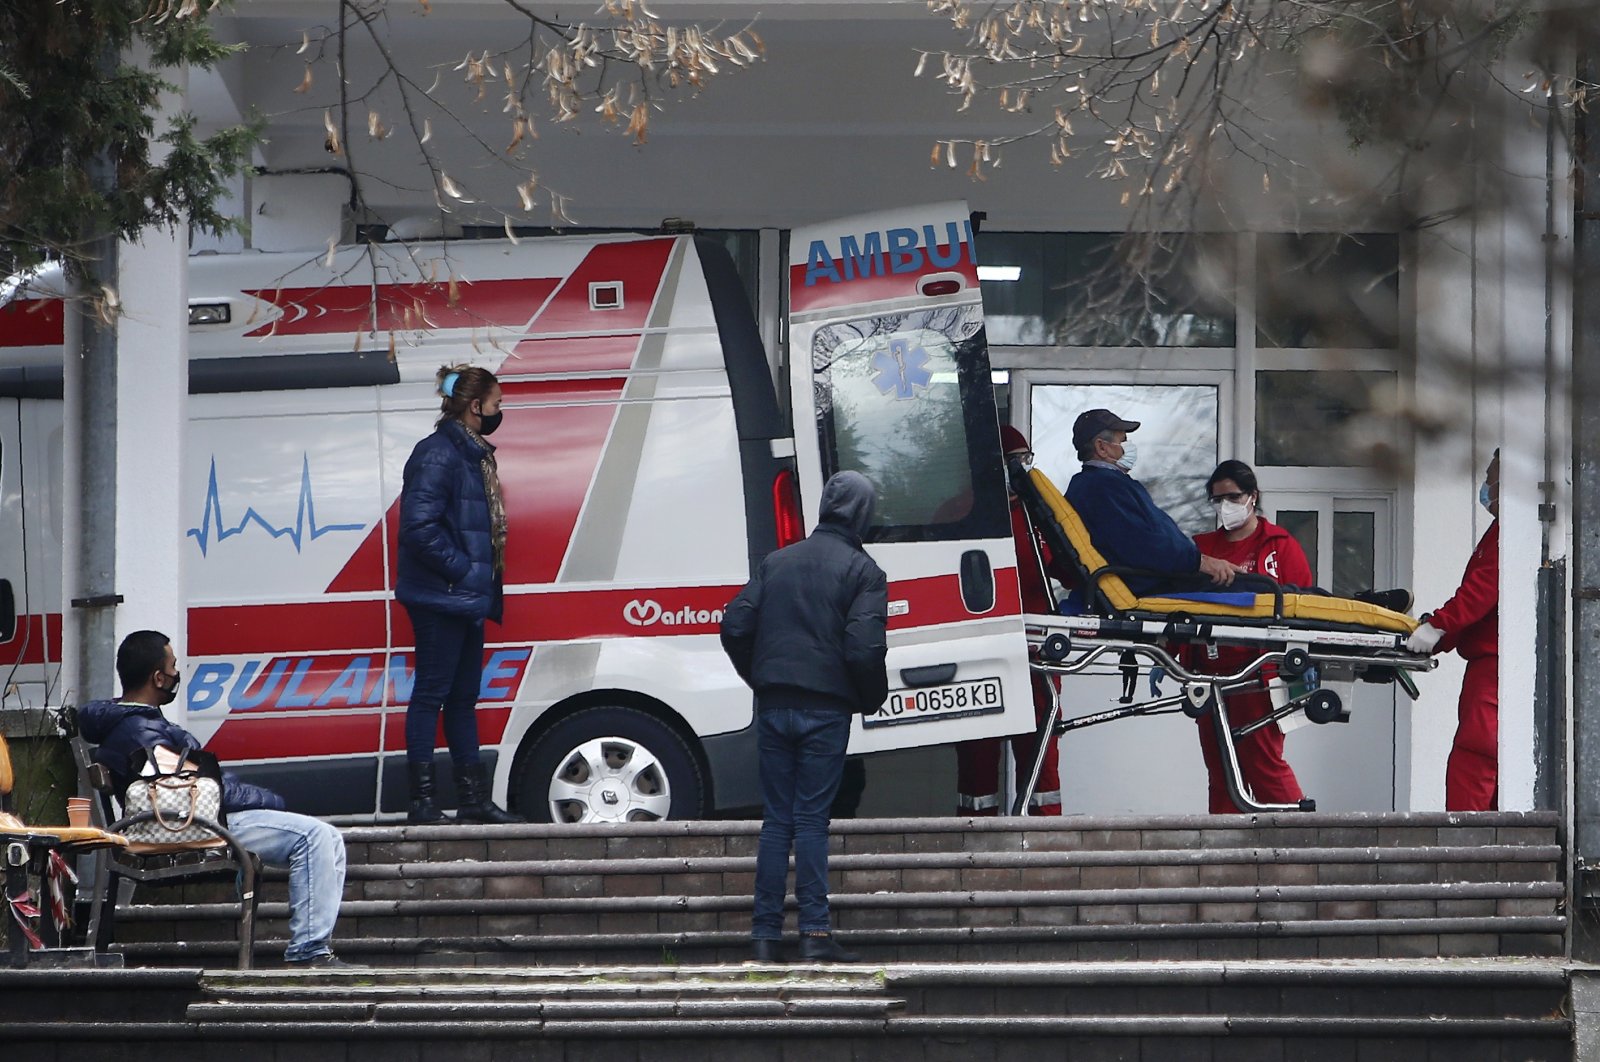 Health workers wheel out a patient from an ambulance, at the entrance of the University Clinic complex in Skopje, North Macedonia, Dec. 29, 2020. (AP Photo)